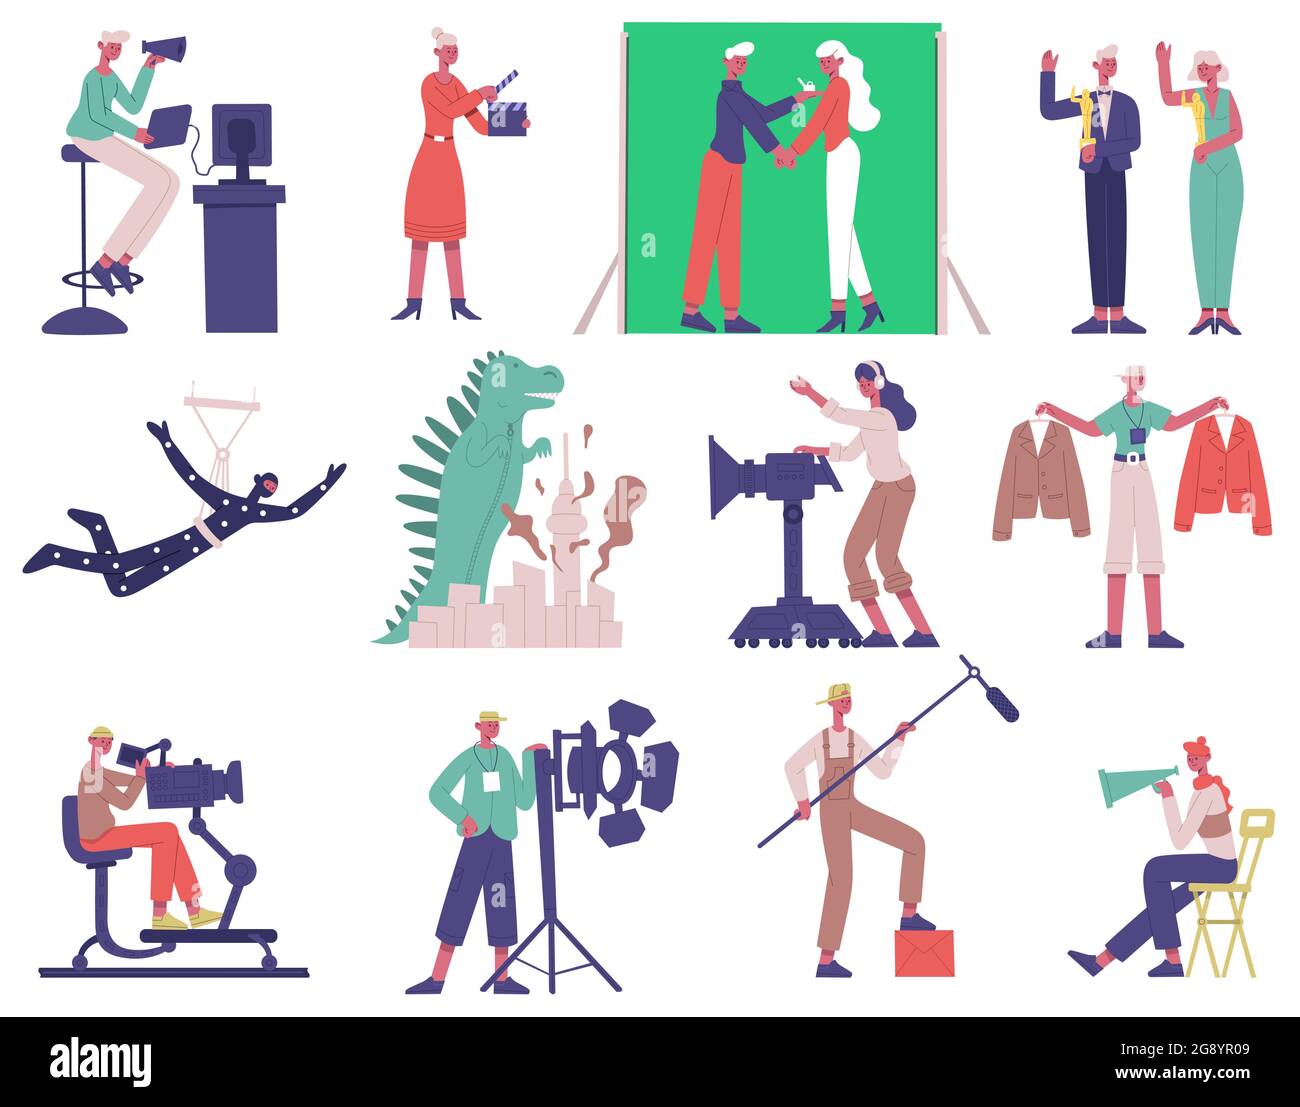 Film shooting characters. Cinema movie production process, film director, cameraman and actors vector illustration set. Movie production team Stock Vector